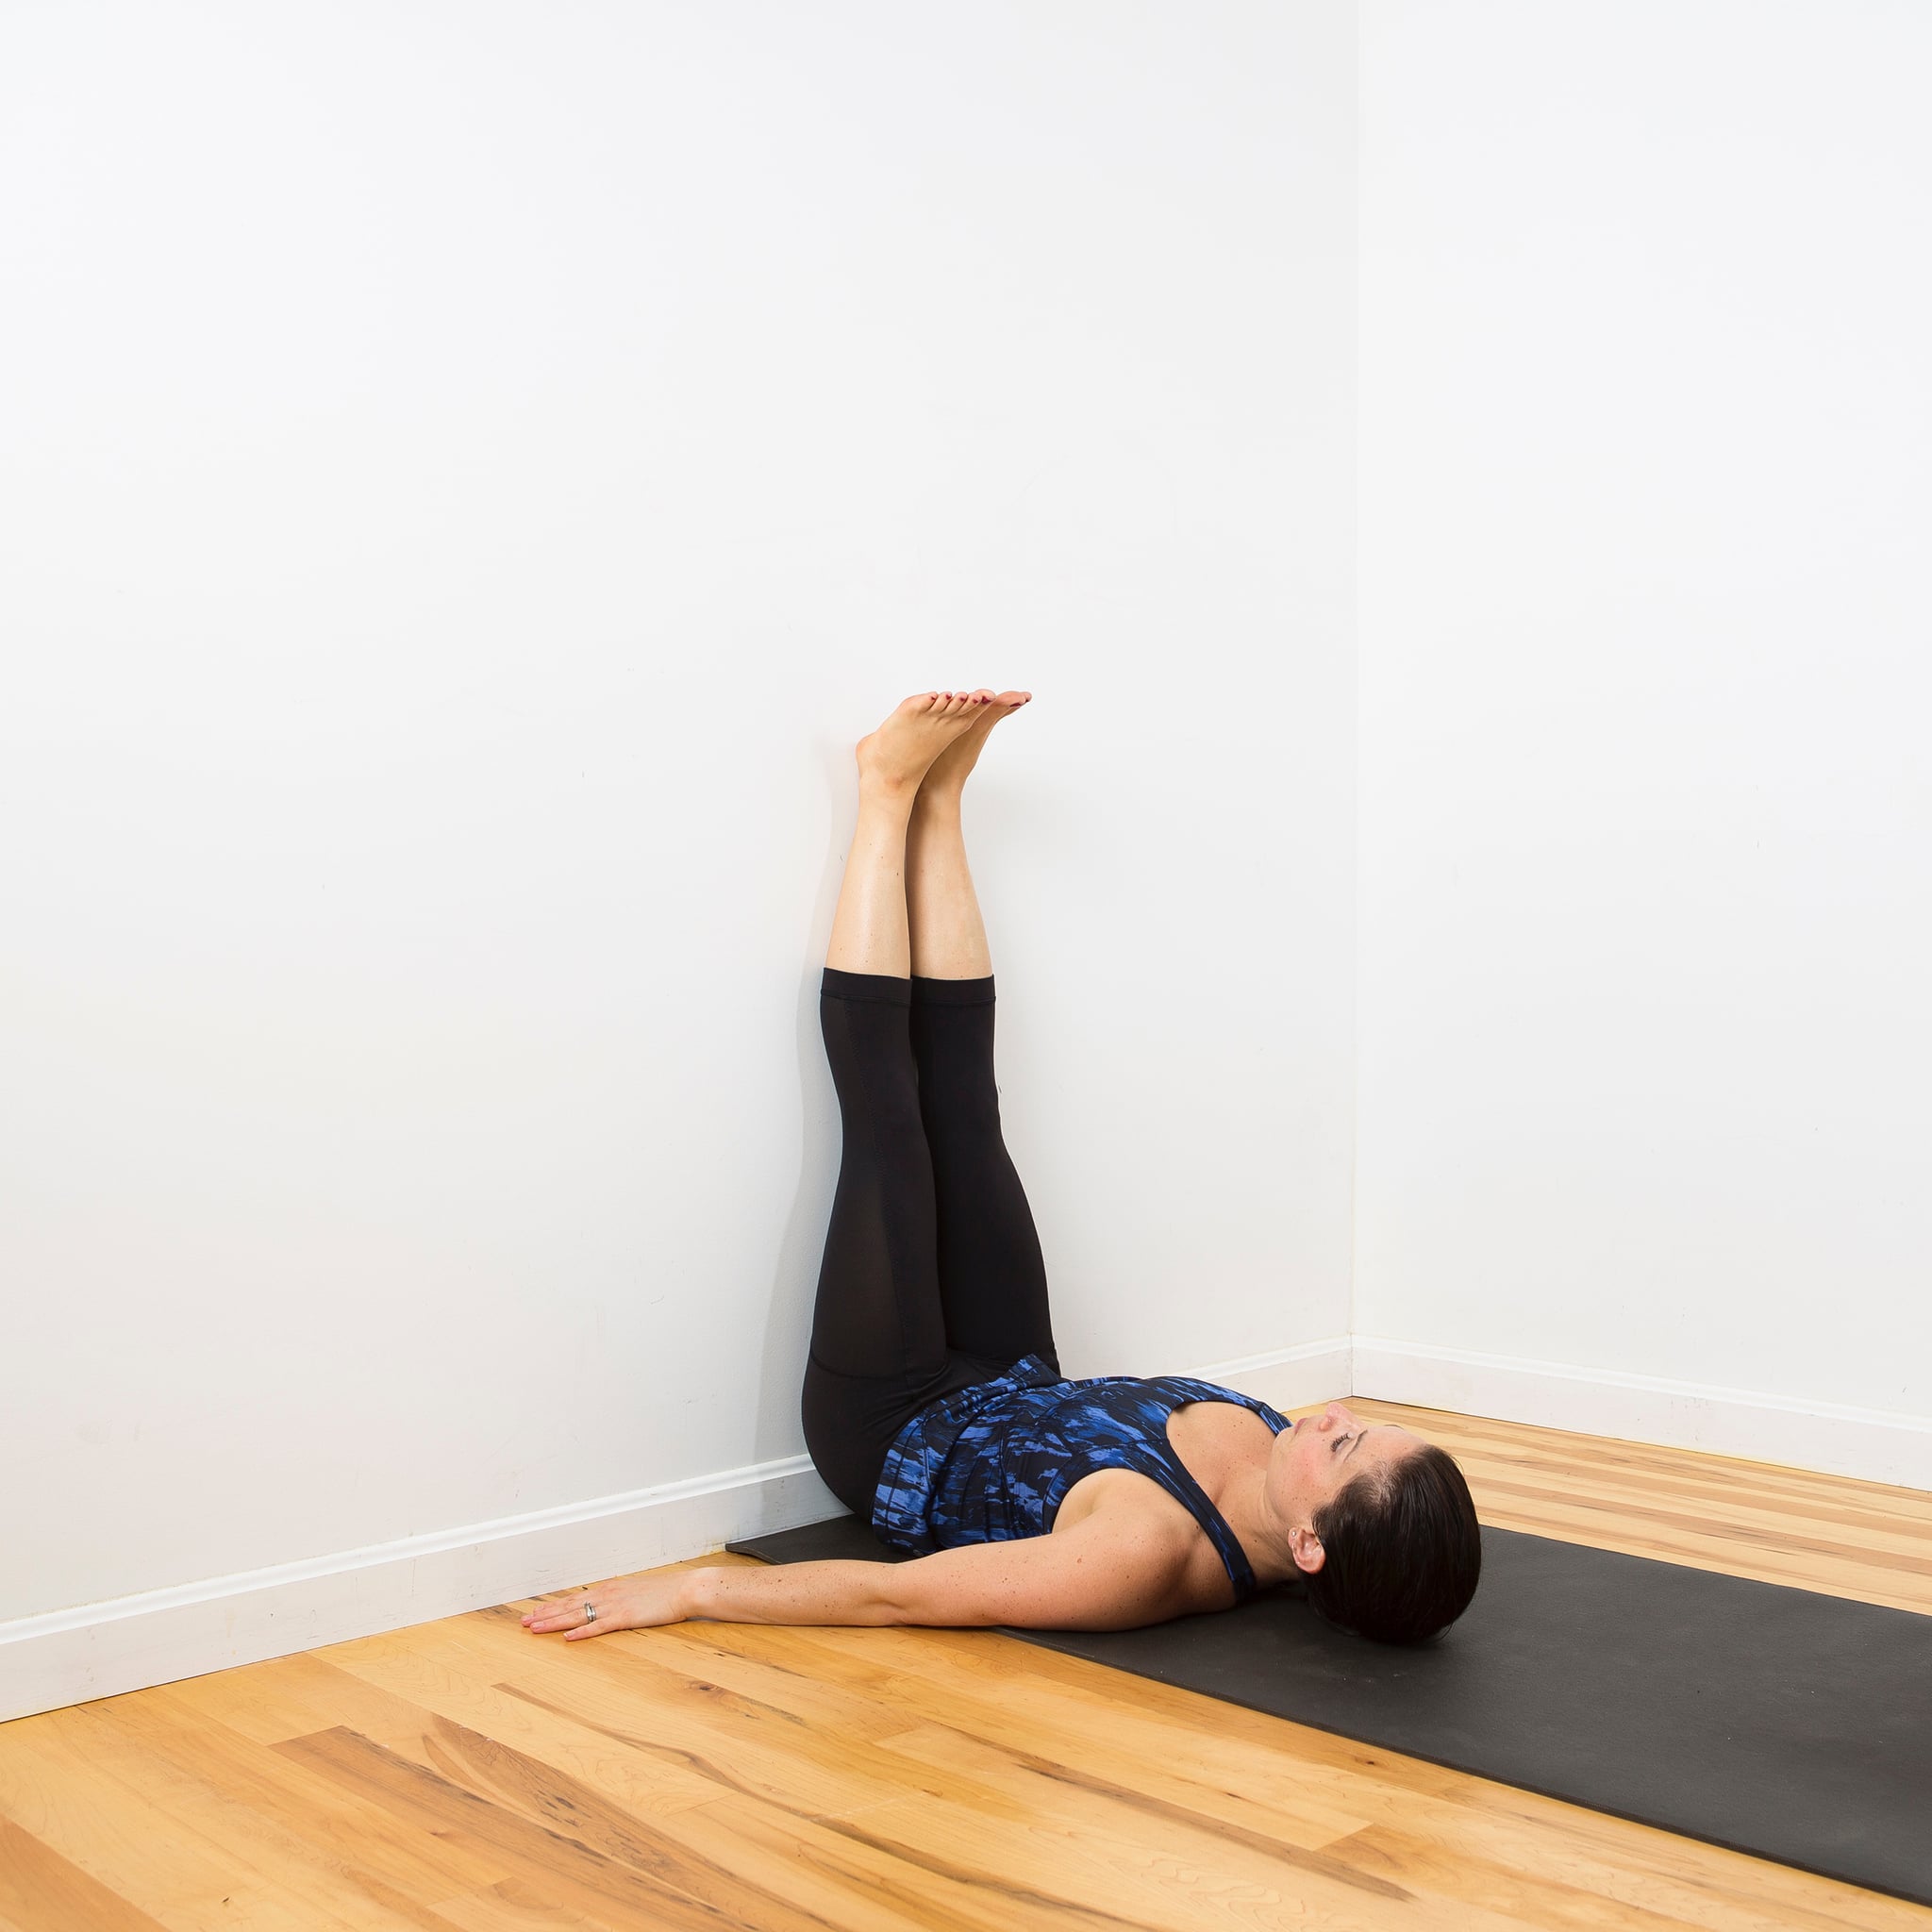 Person lying in legs up the wall pose against a white wall